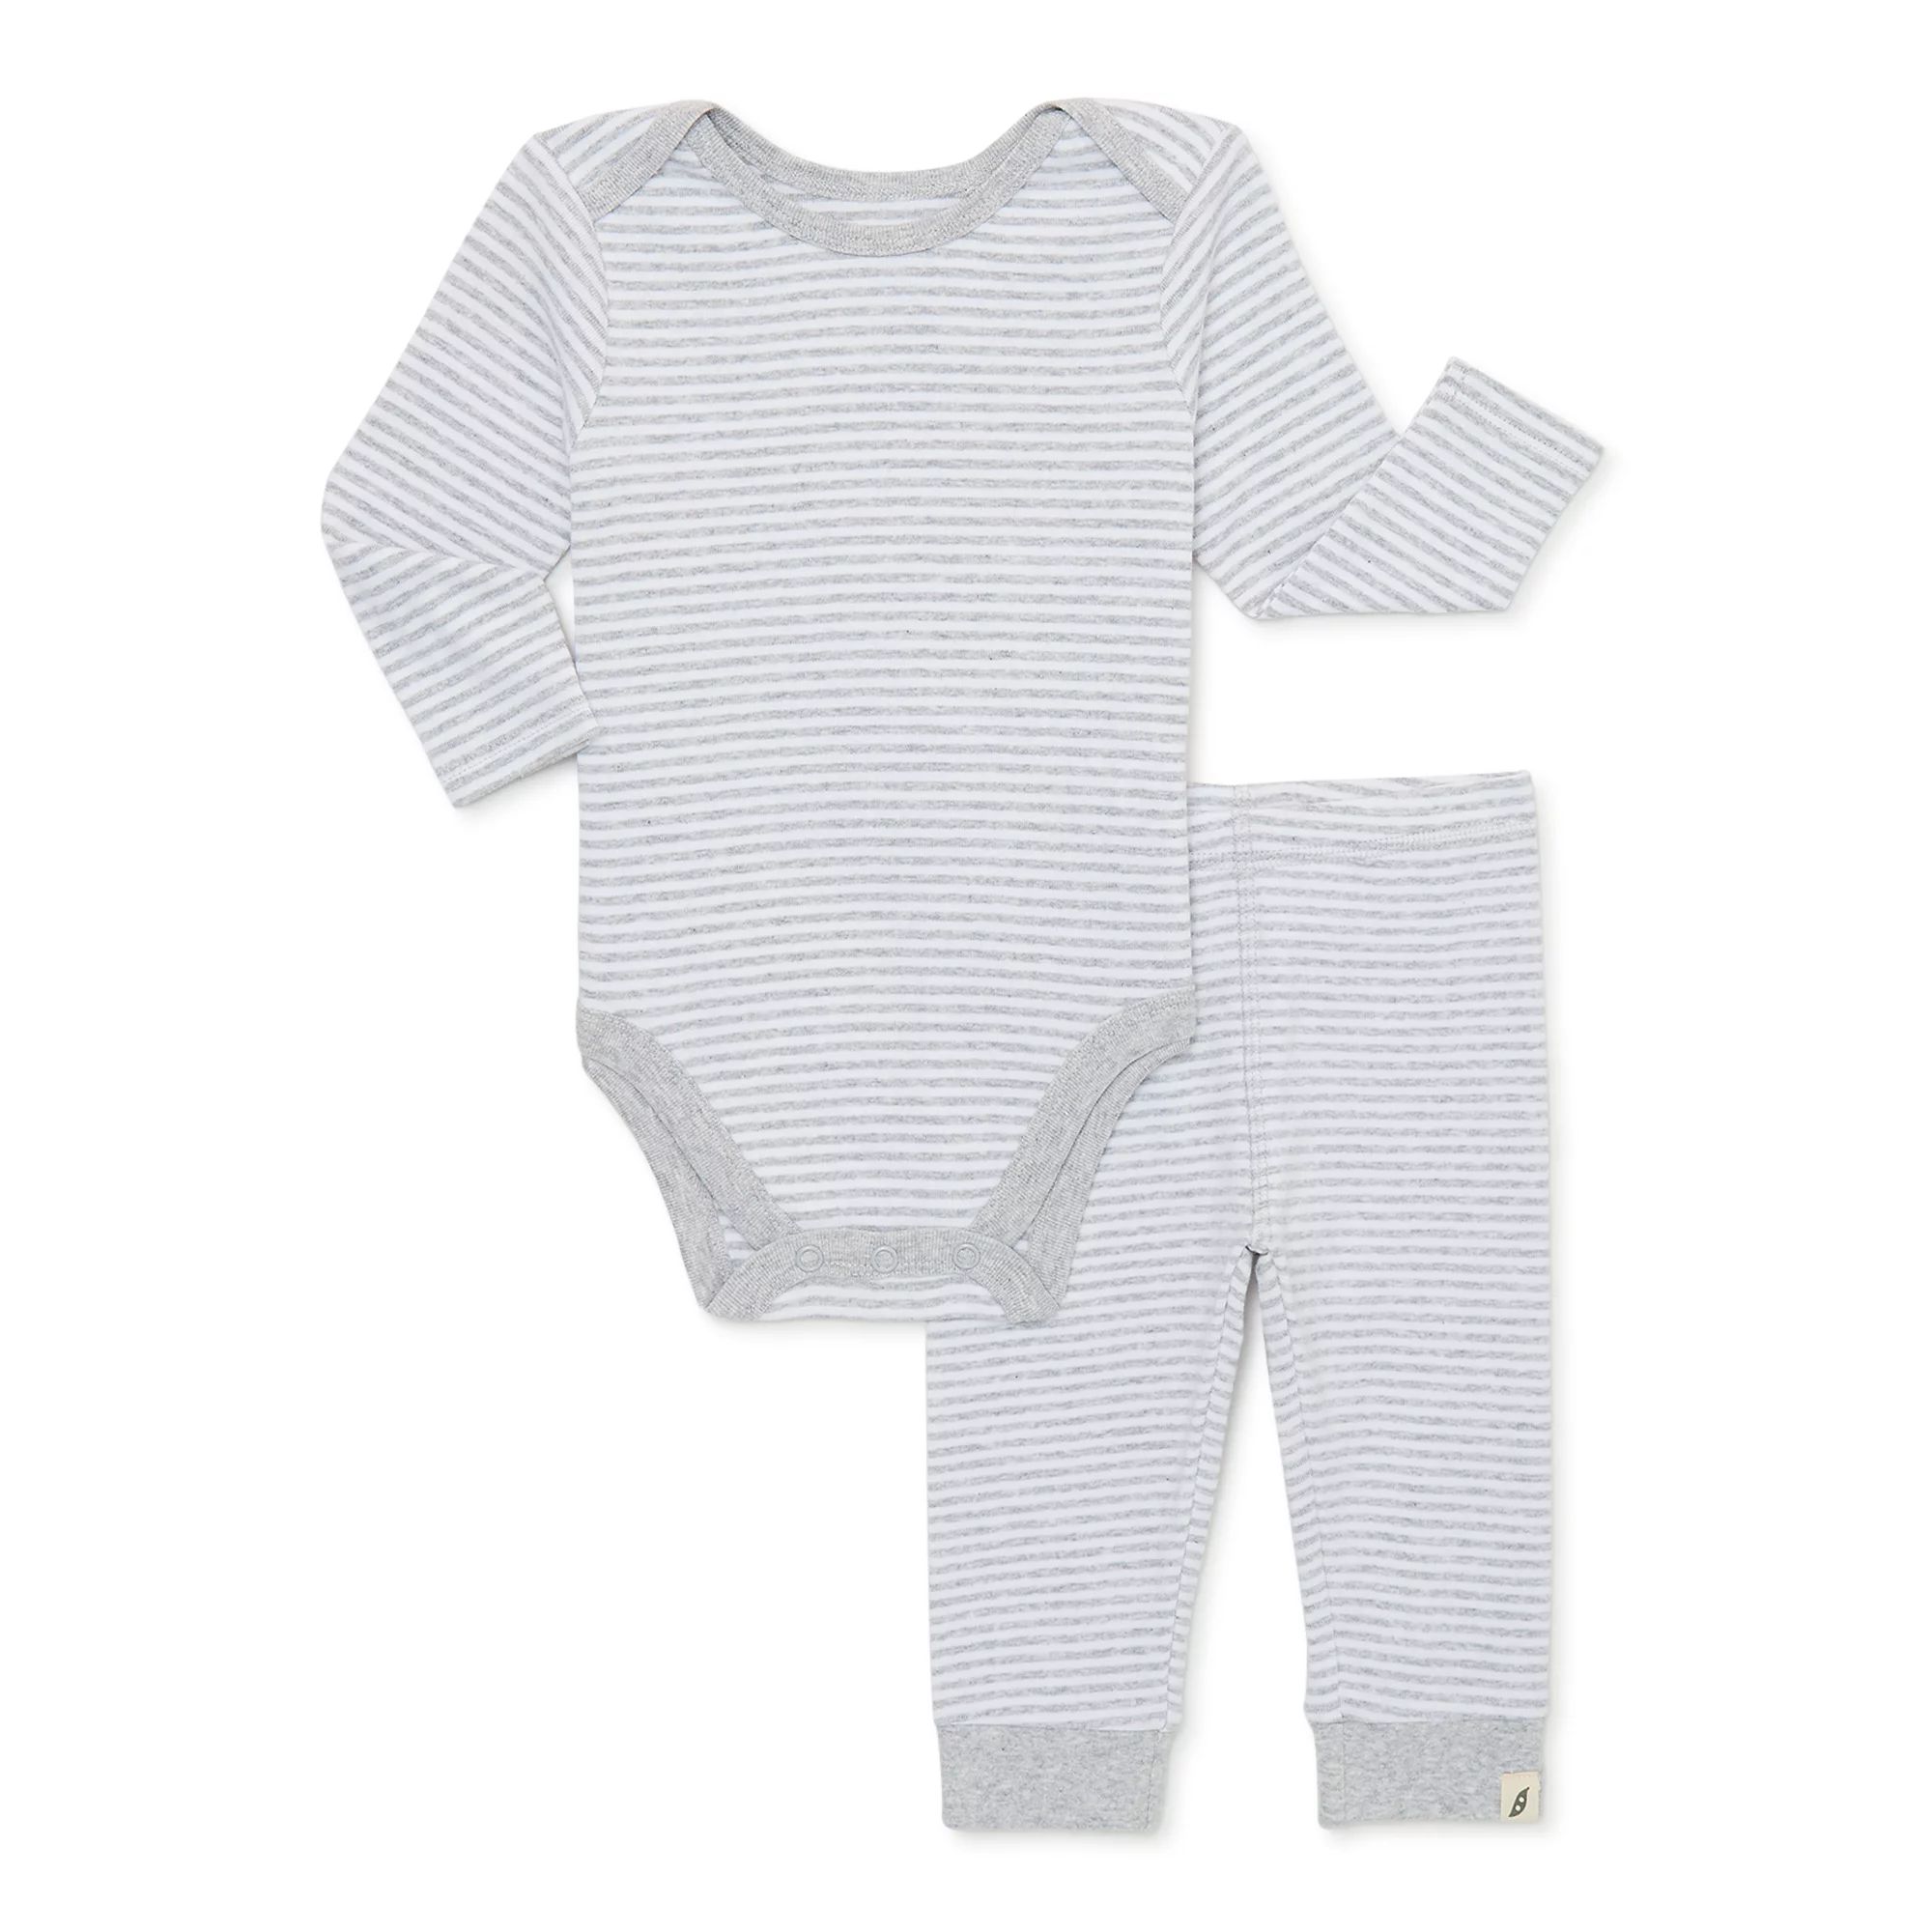 easy-peasy Baby Bodysuit and Jogger Pants Outfit Set, 2-Piece, Sizes 0/3-24 Months | Walmart (US)